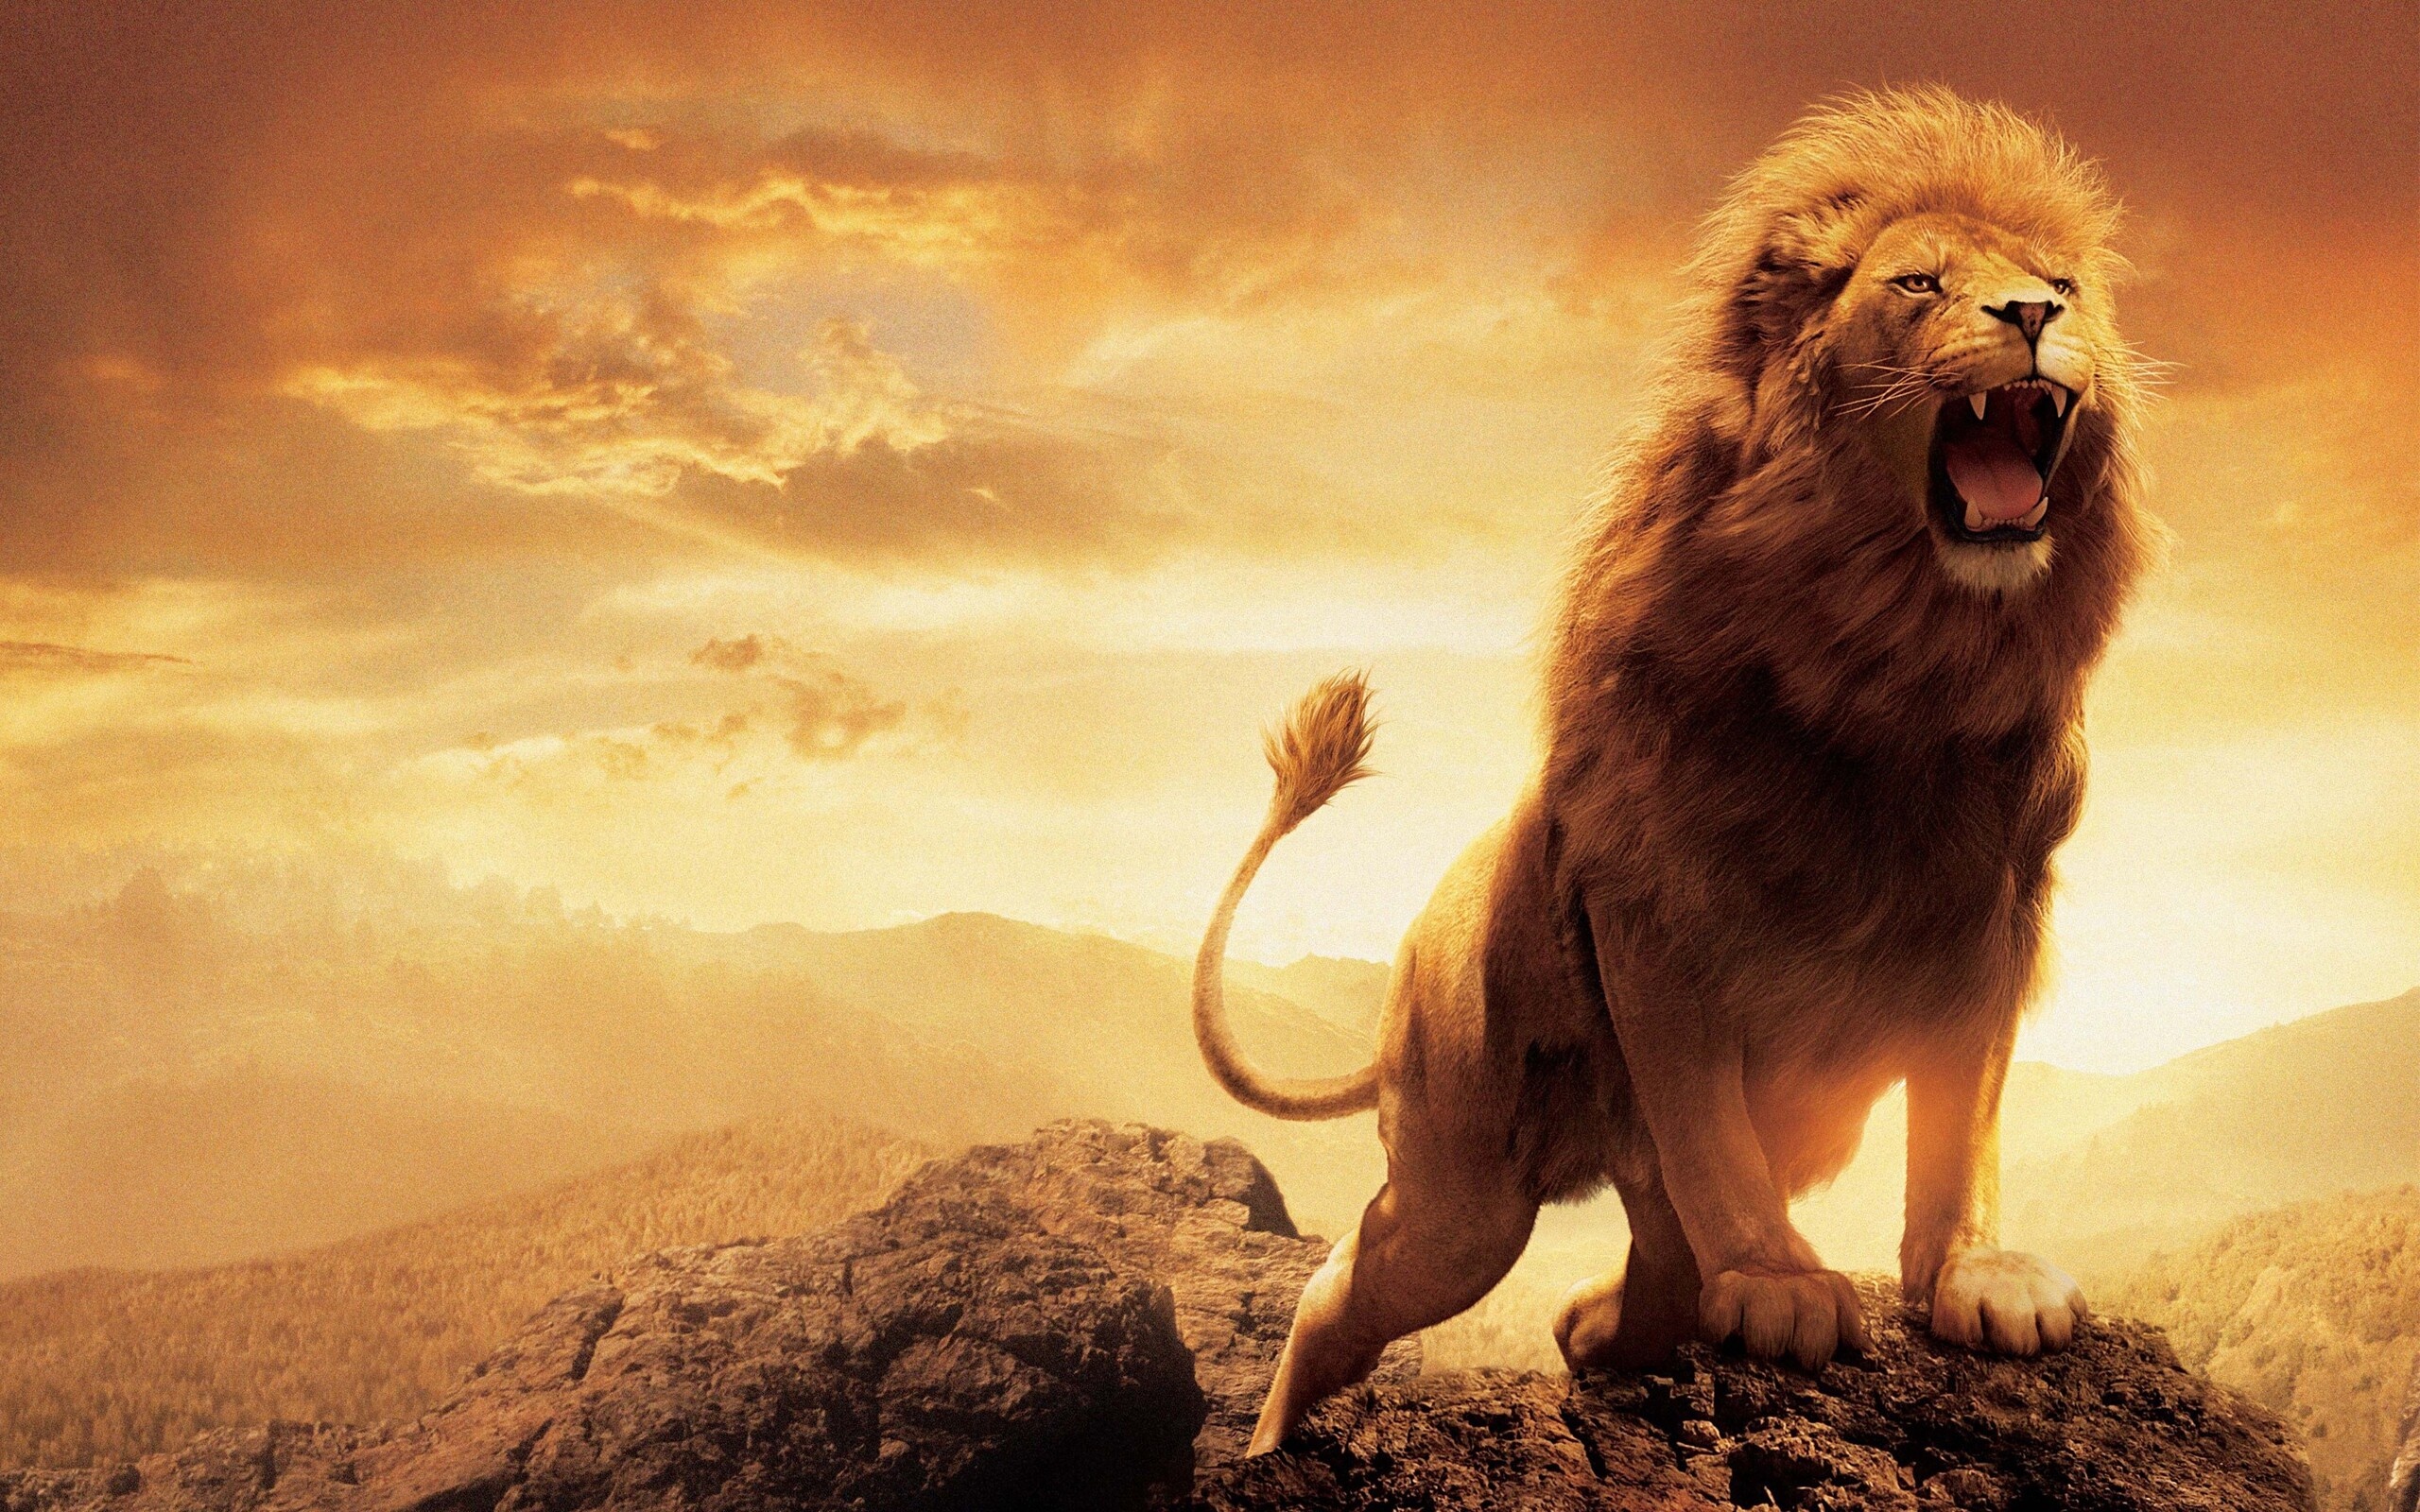 Chronicles of Narnia, Lion's resolution, HD images, Photos, 2560x1600 HD Desktop